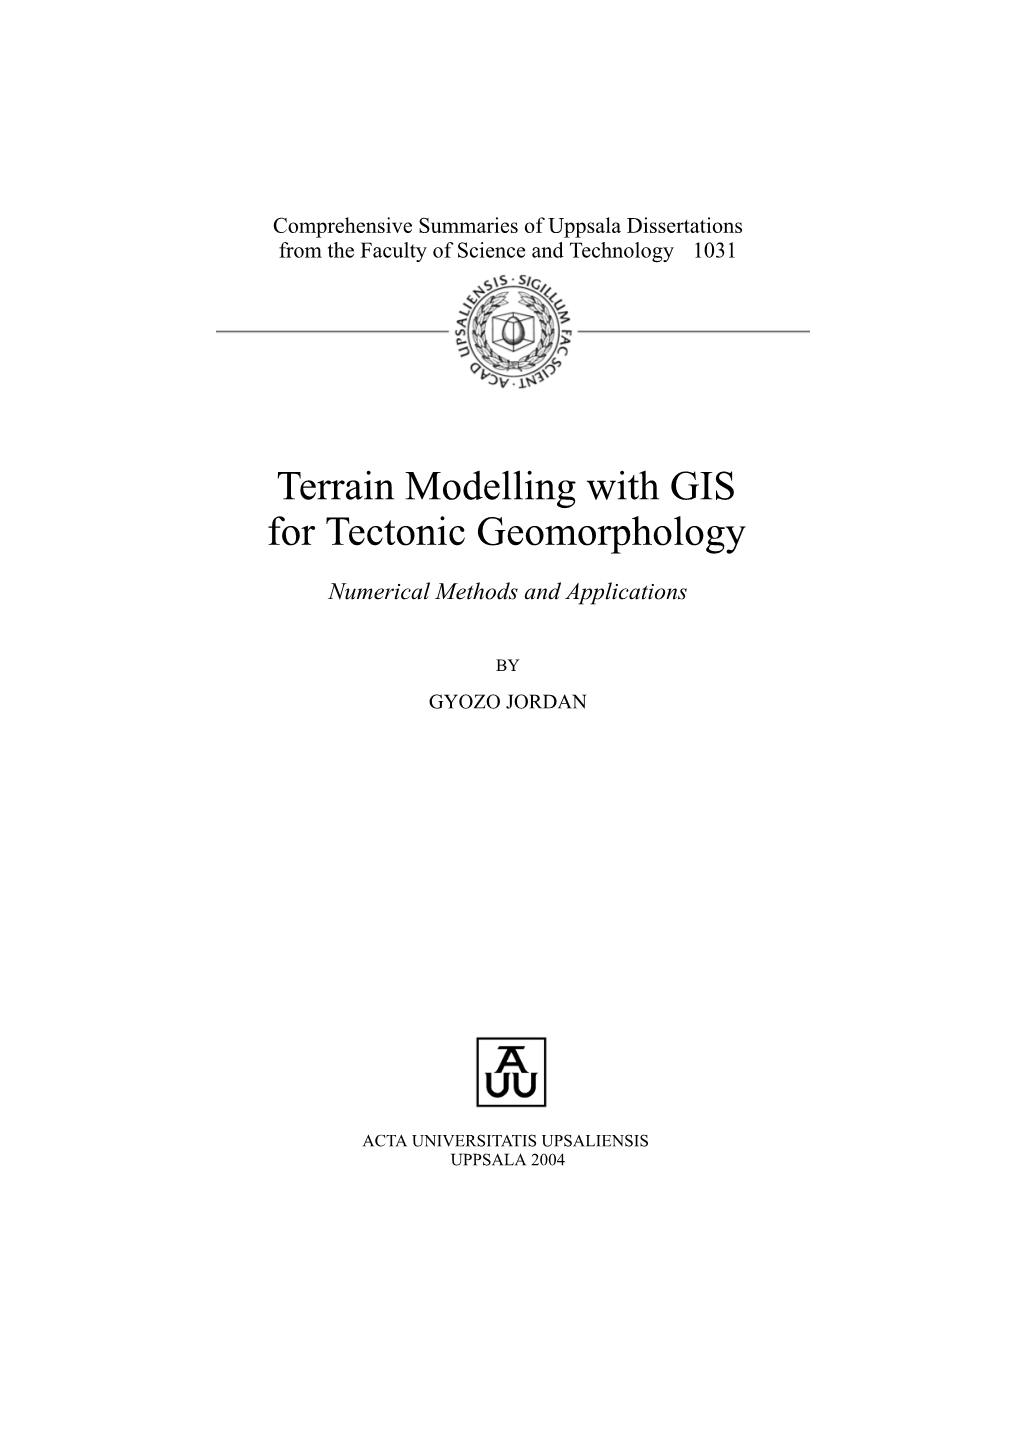 Terrain Modelling with GIS for Tectonic Geomorphology